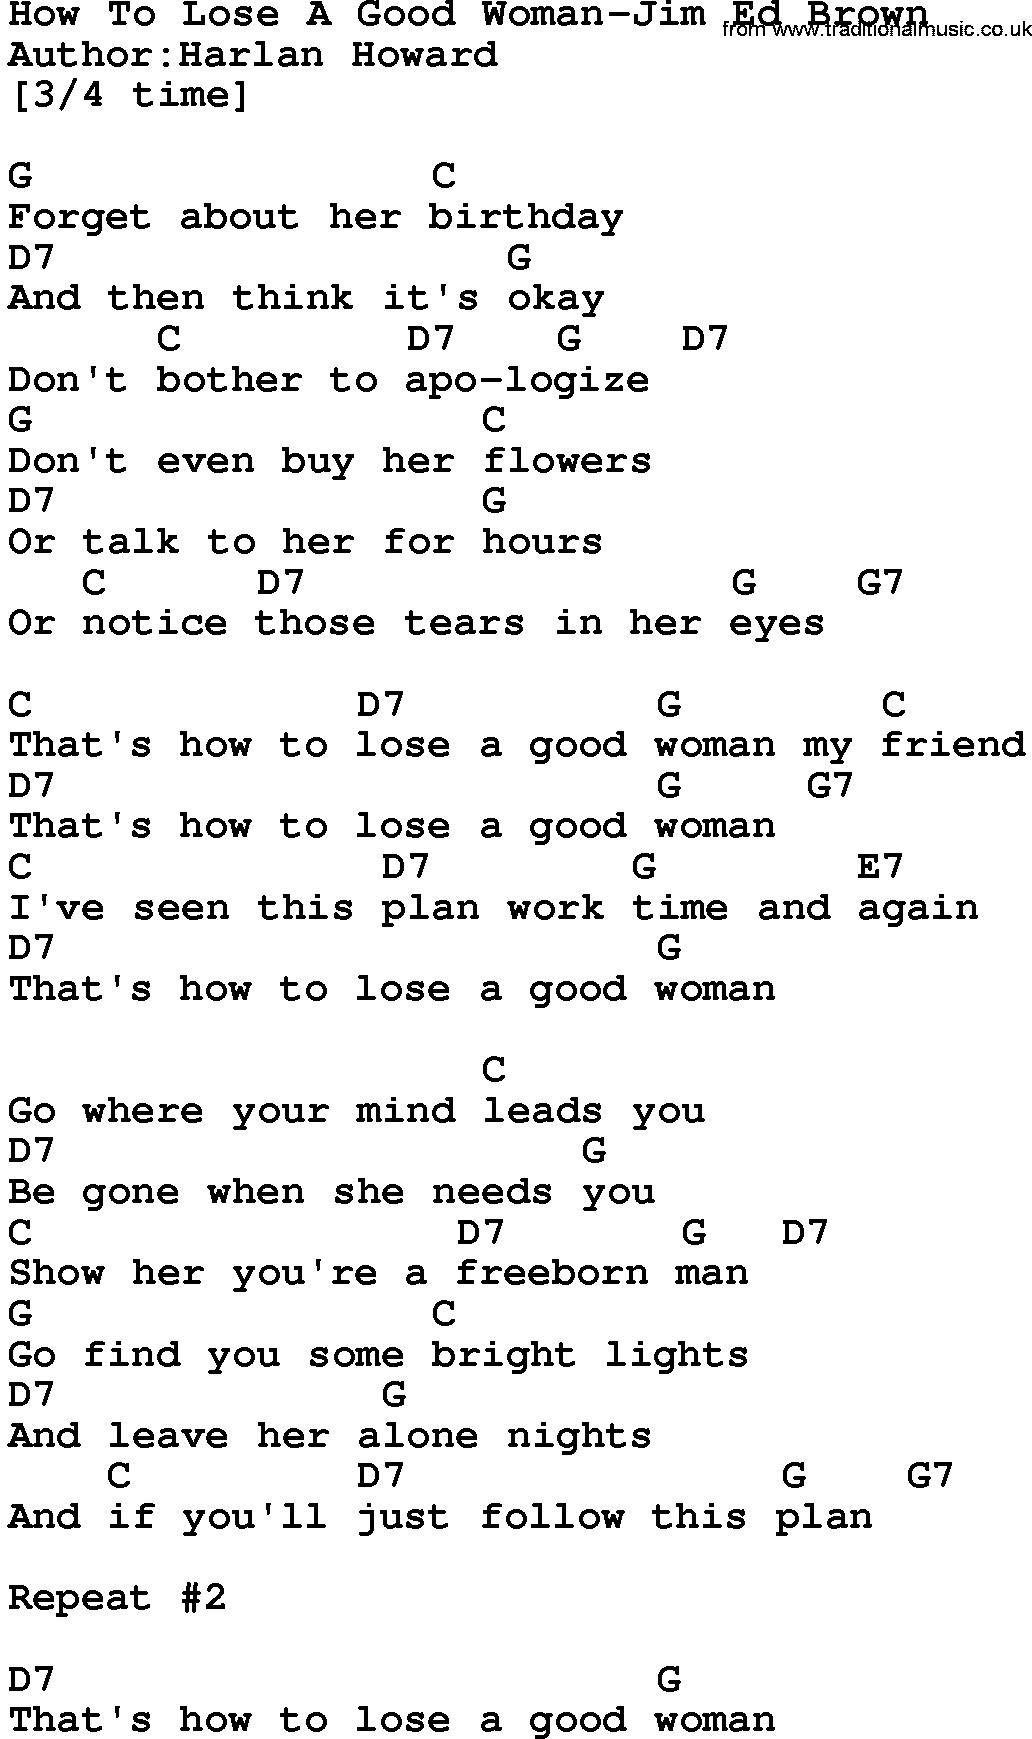 Country music song: How To Lose A Good Woman-Jim Ed Brown lyrics and chords